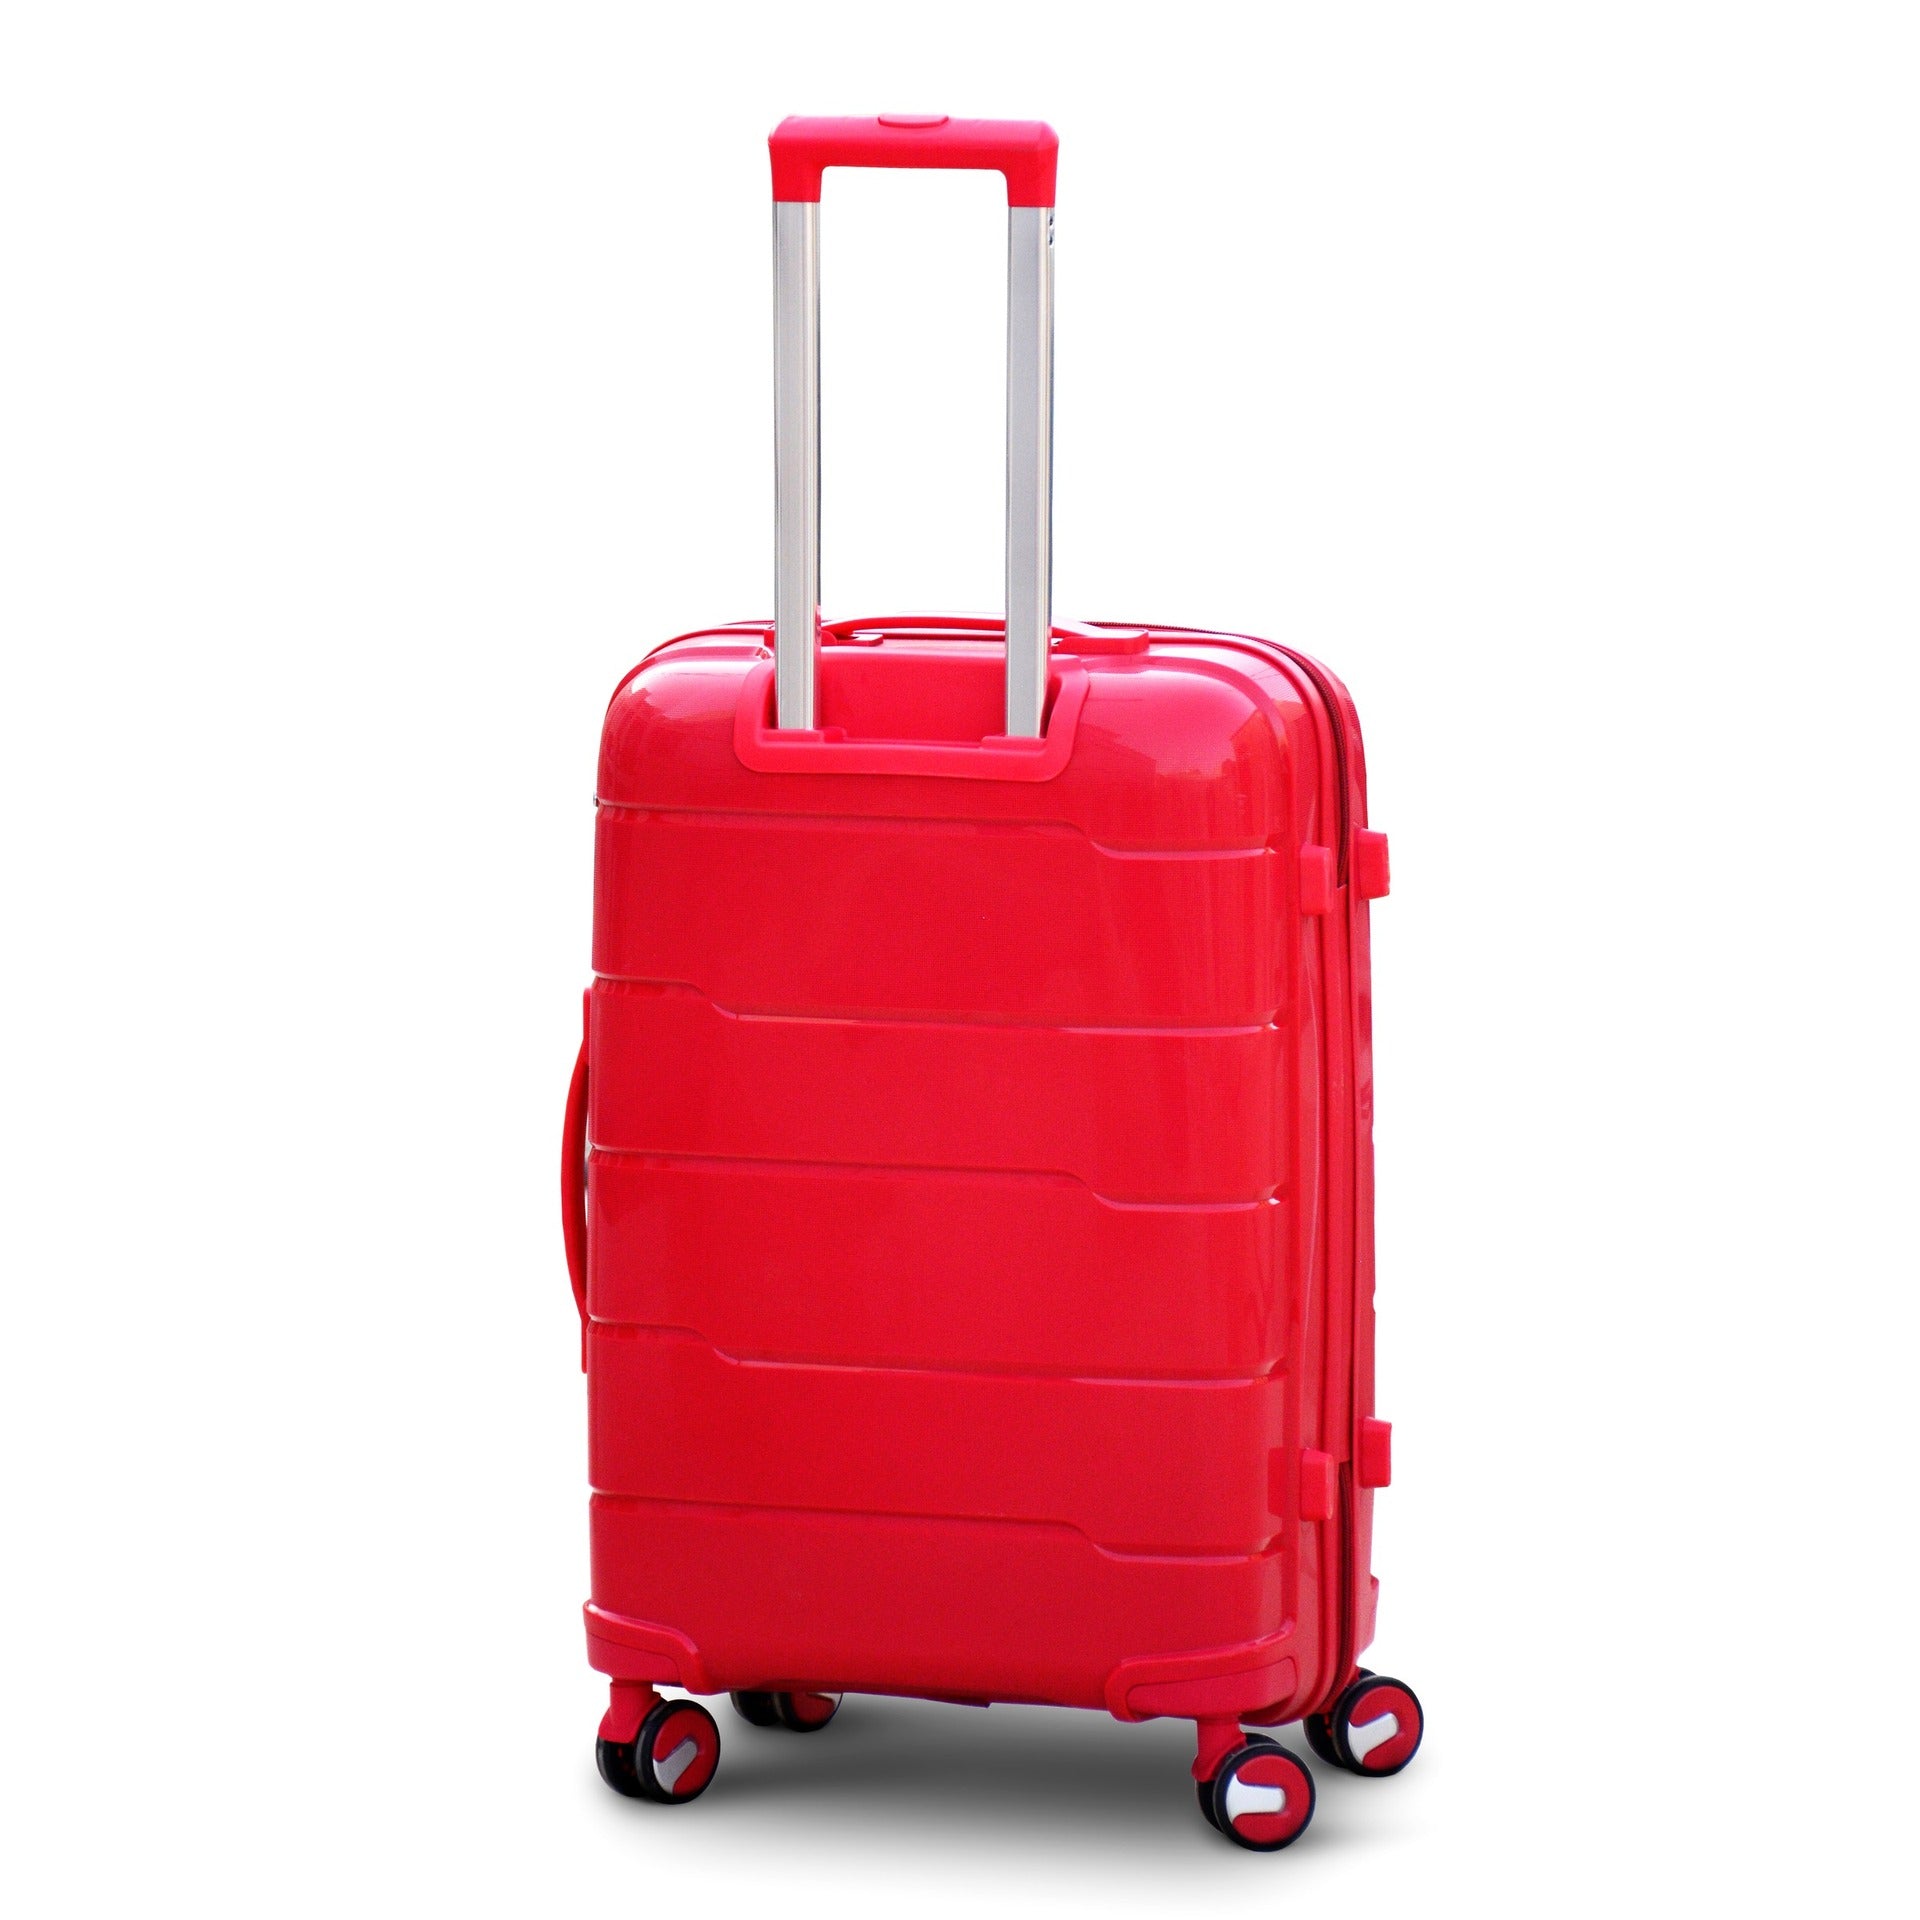 20" Red Colour Ceramic Smooth PP Luggage Lightweight Hard Case Carry On Trolley Bag with Double Spinner Wheel